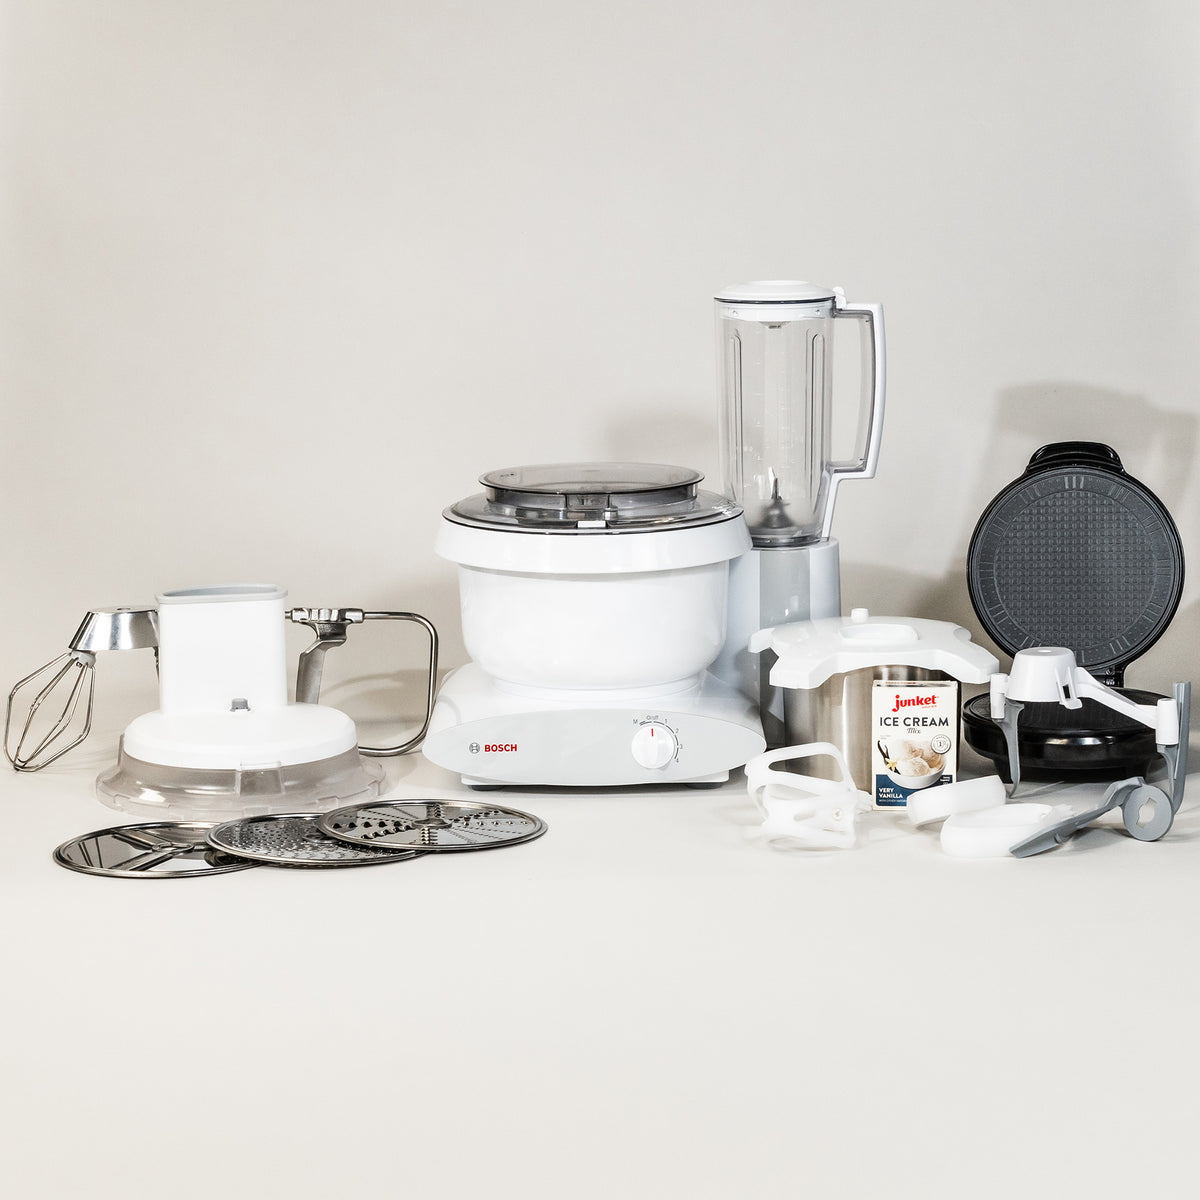 The Ultimate Guide to the Bosch Universal Plus Mixer